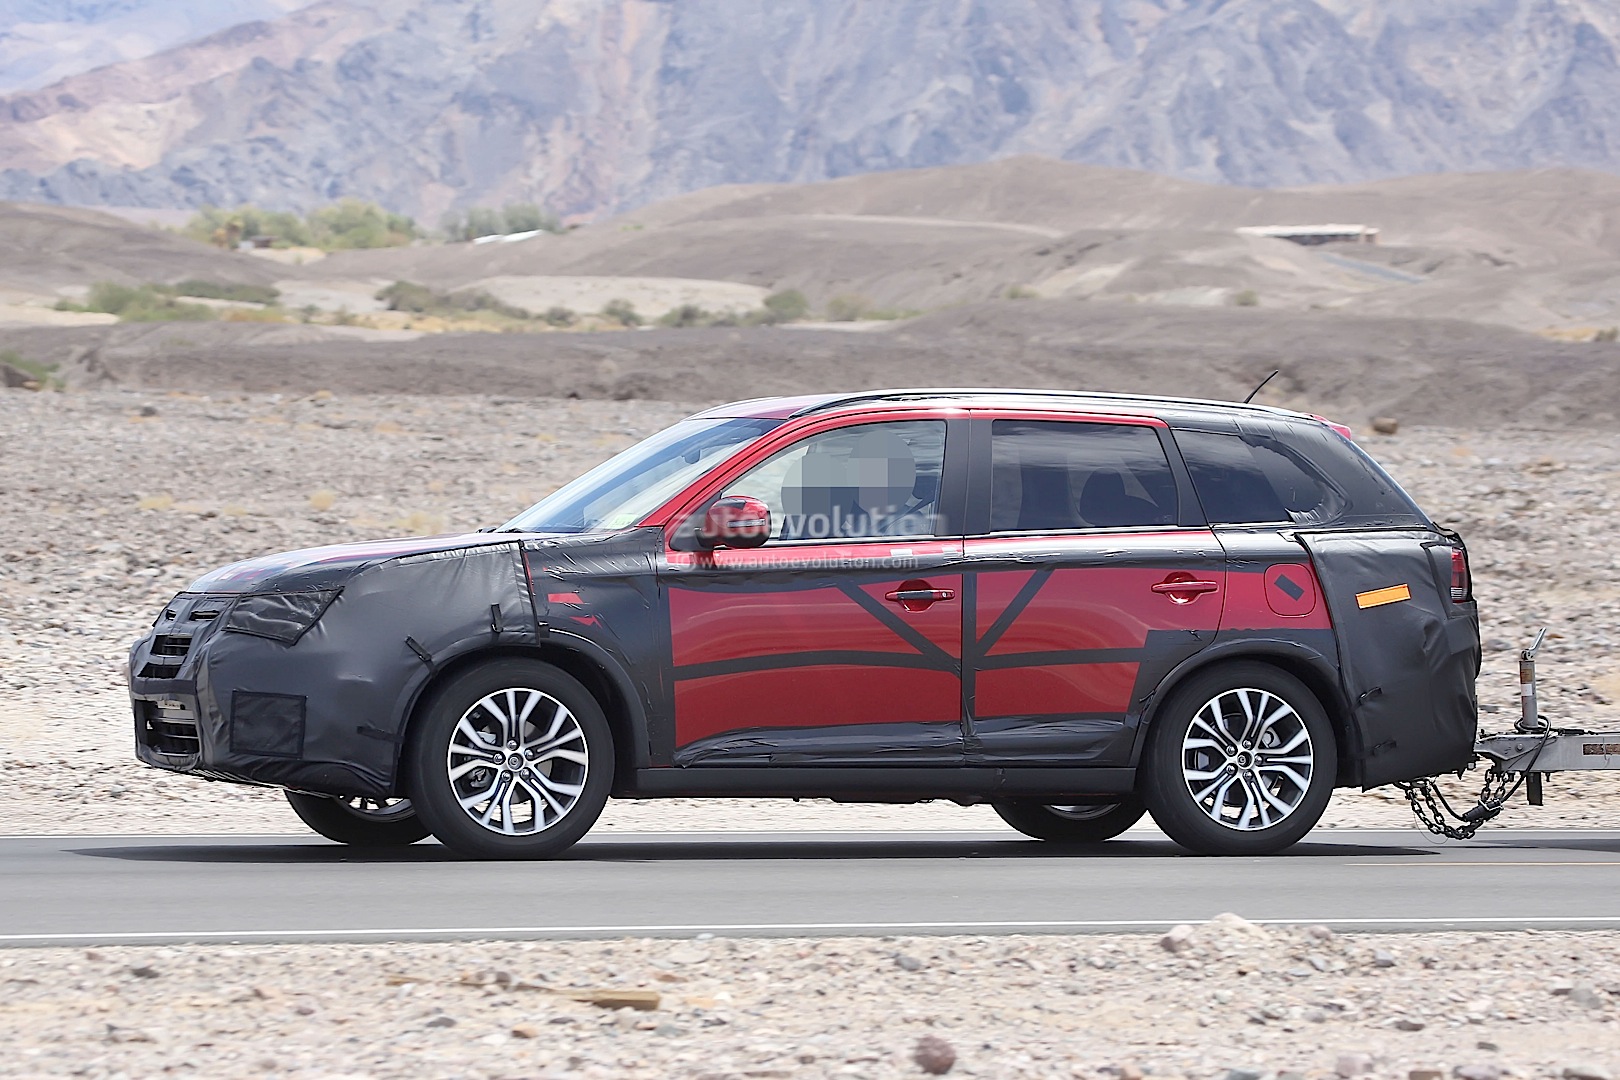 2015 Mitsubishi Outlander Facelift Spied Towing a Trailer - autoevolution